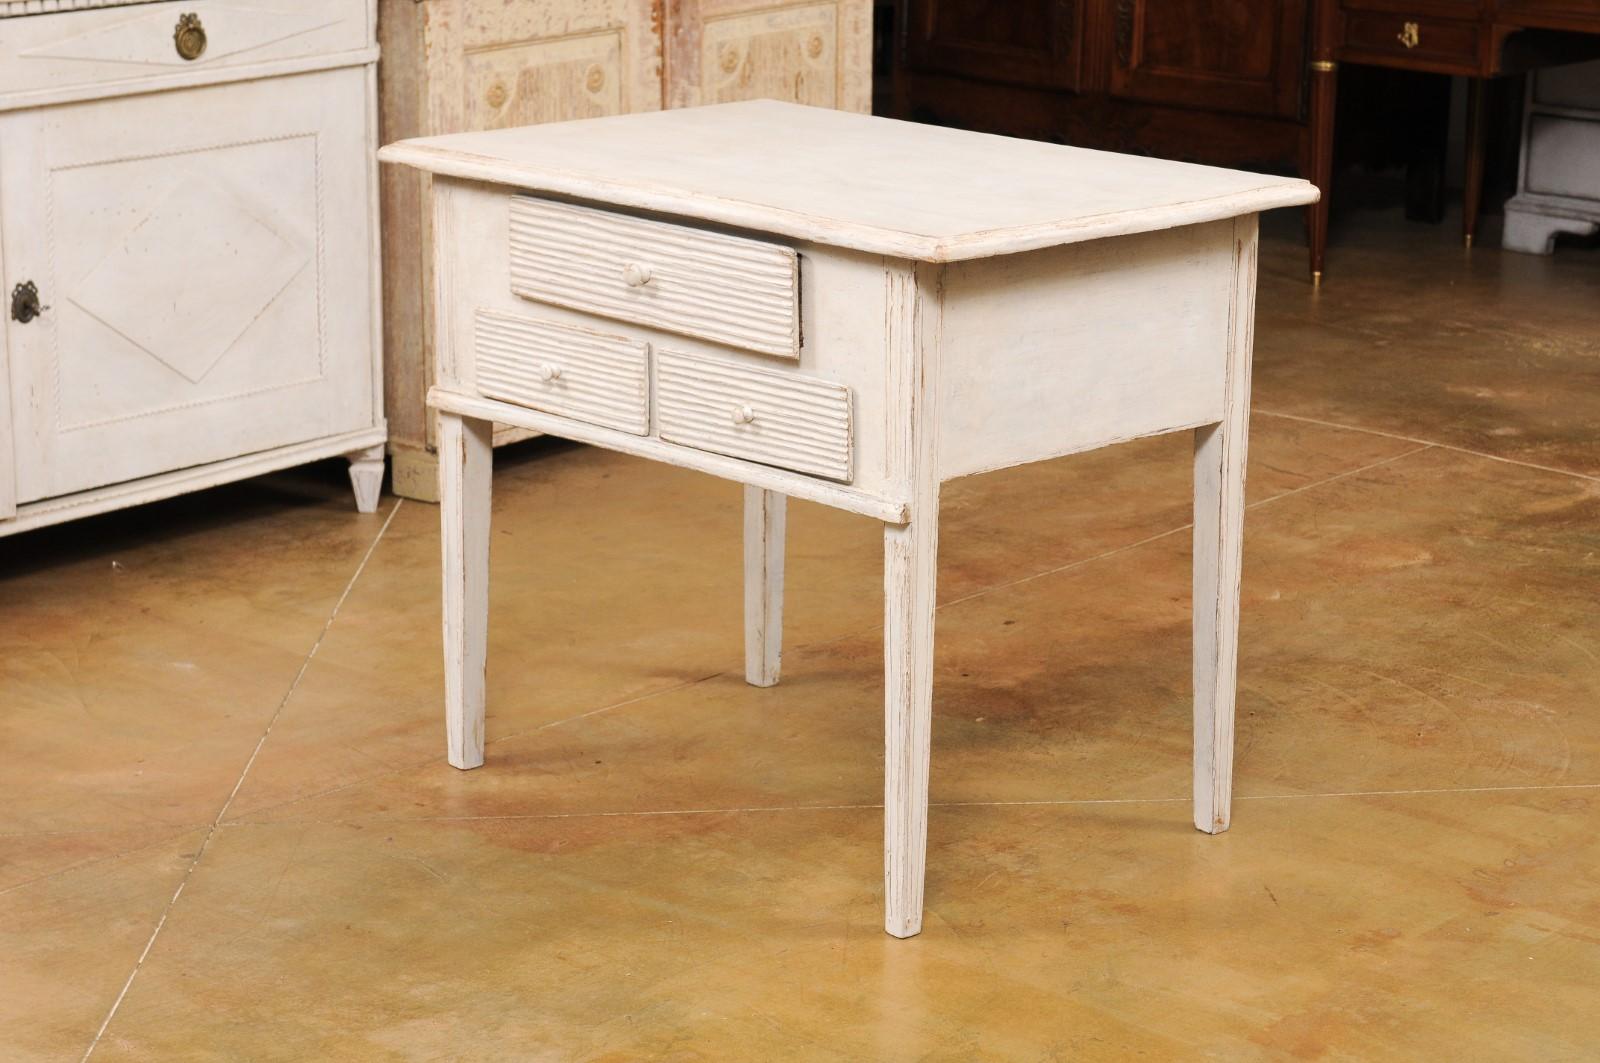 Swedish 1880s Gustavian Style Painted Side Table with Three Reeded Drawers For Sale 6